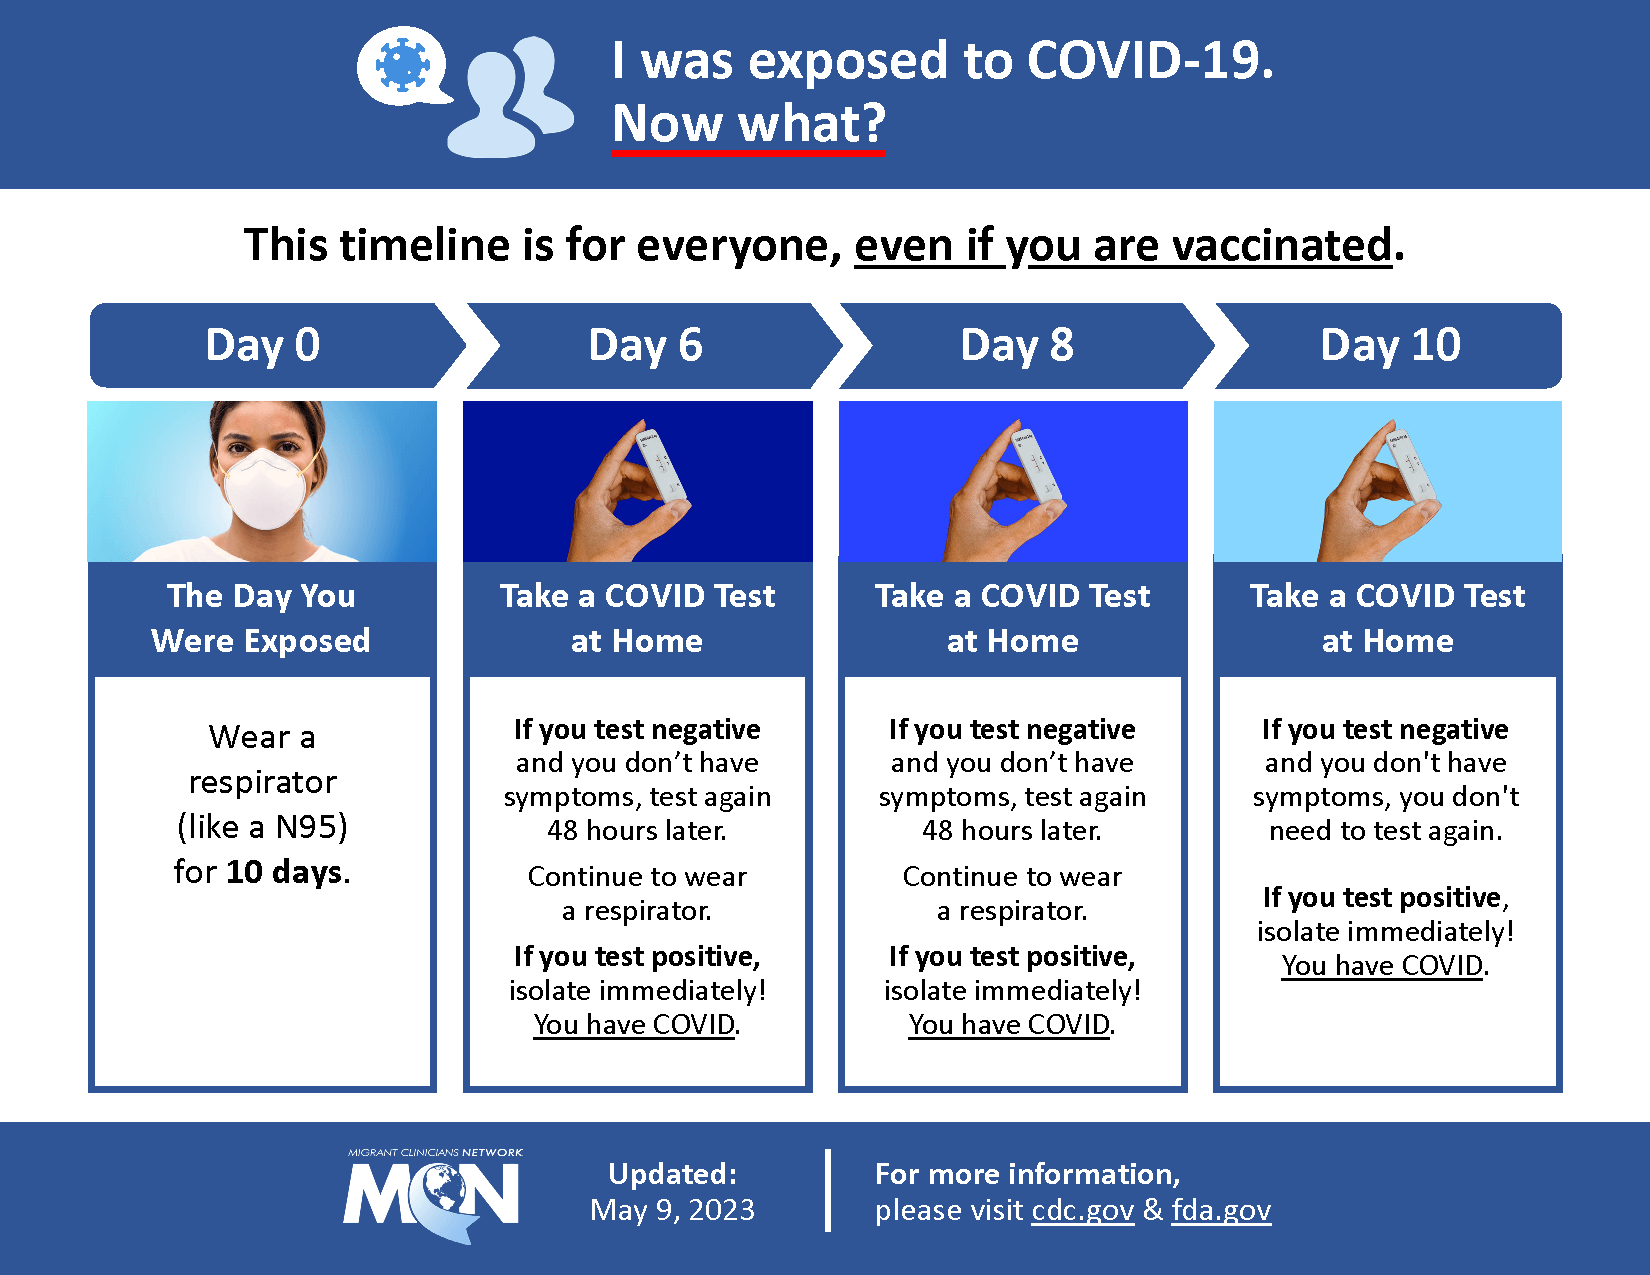 I was exposed to Covid-19. Now What?